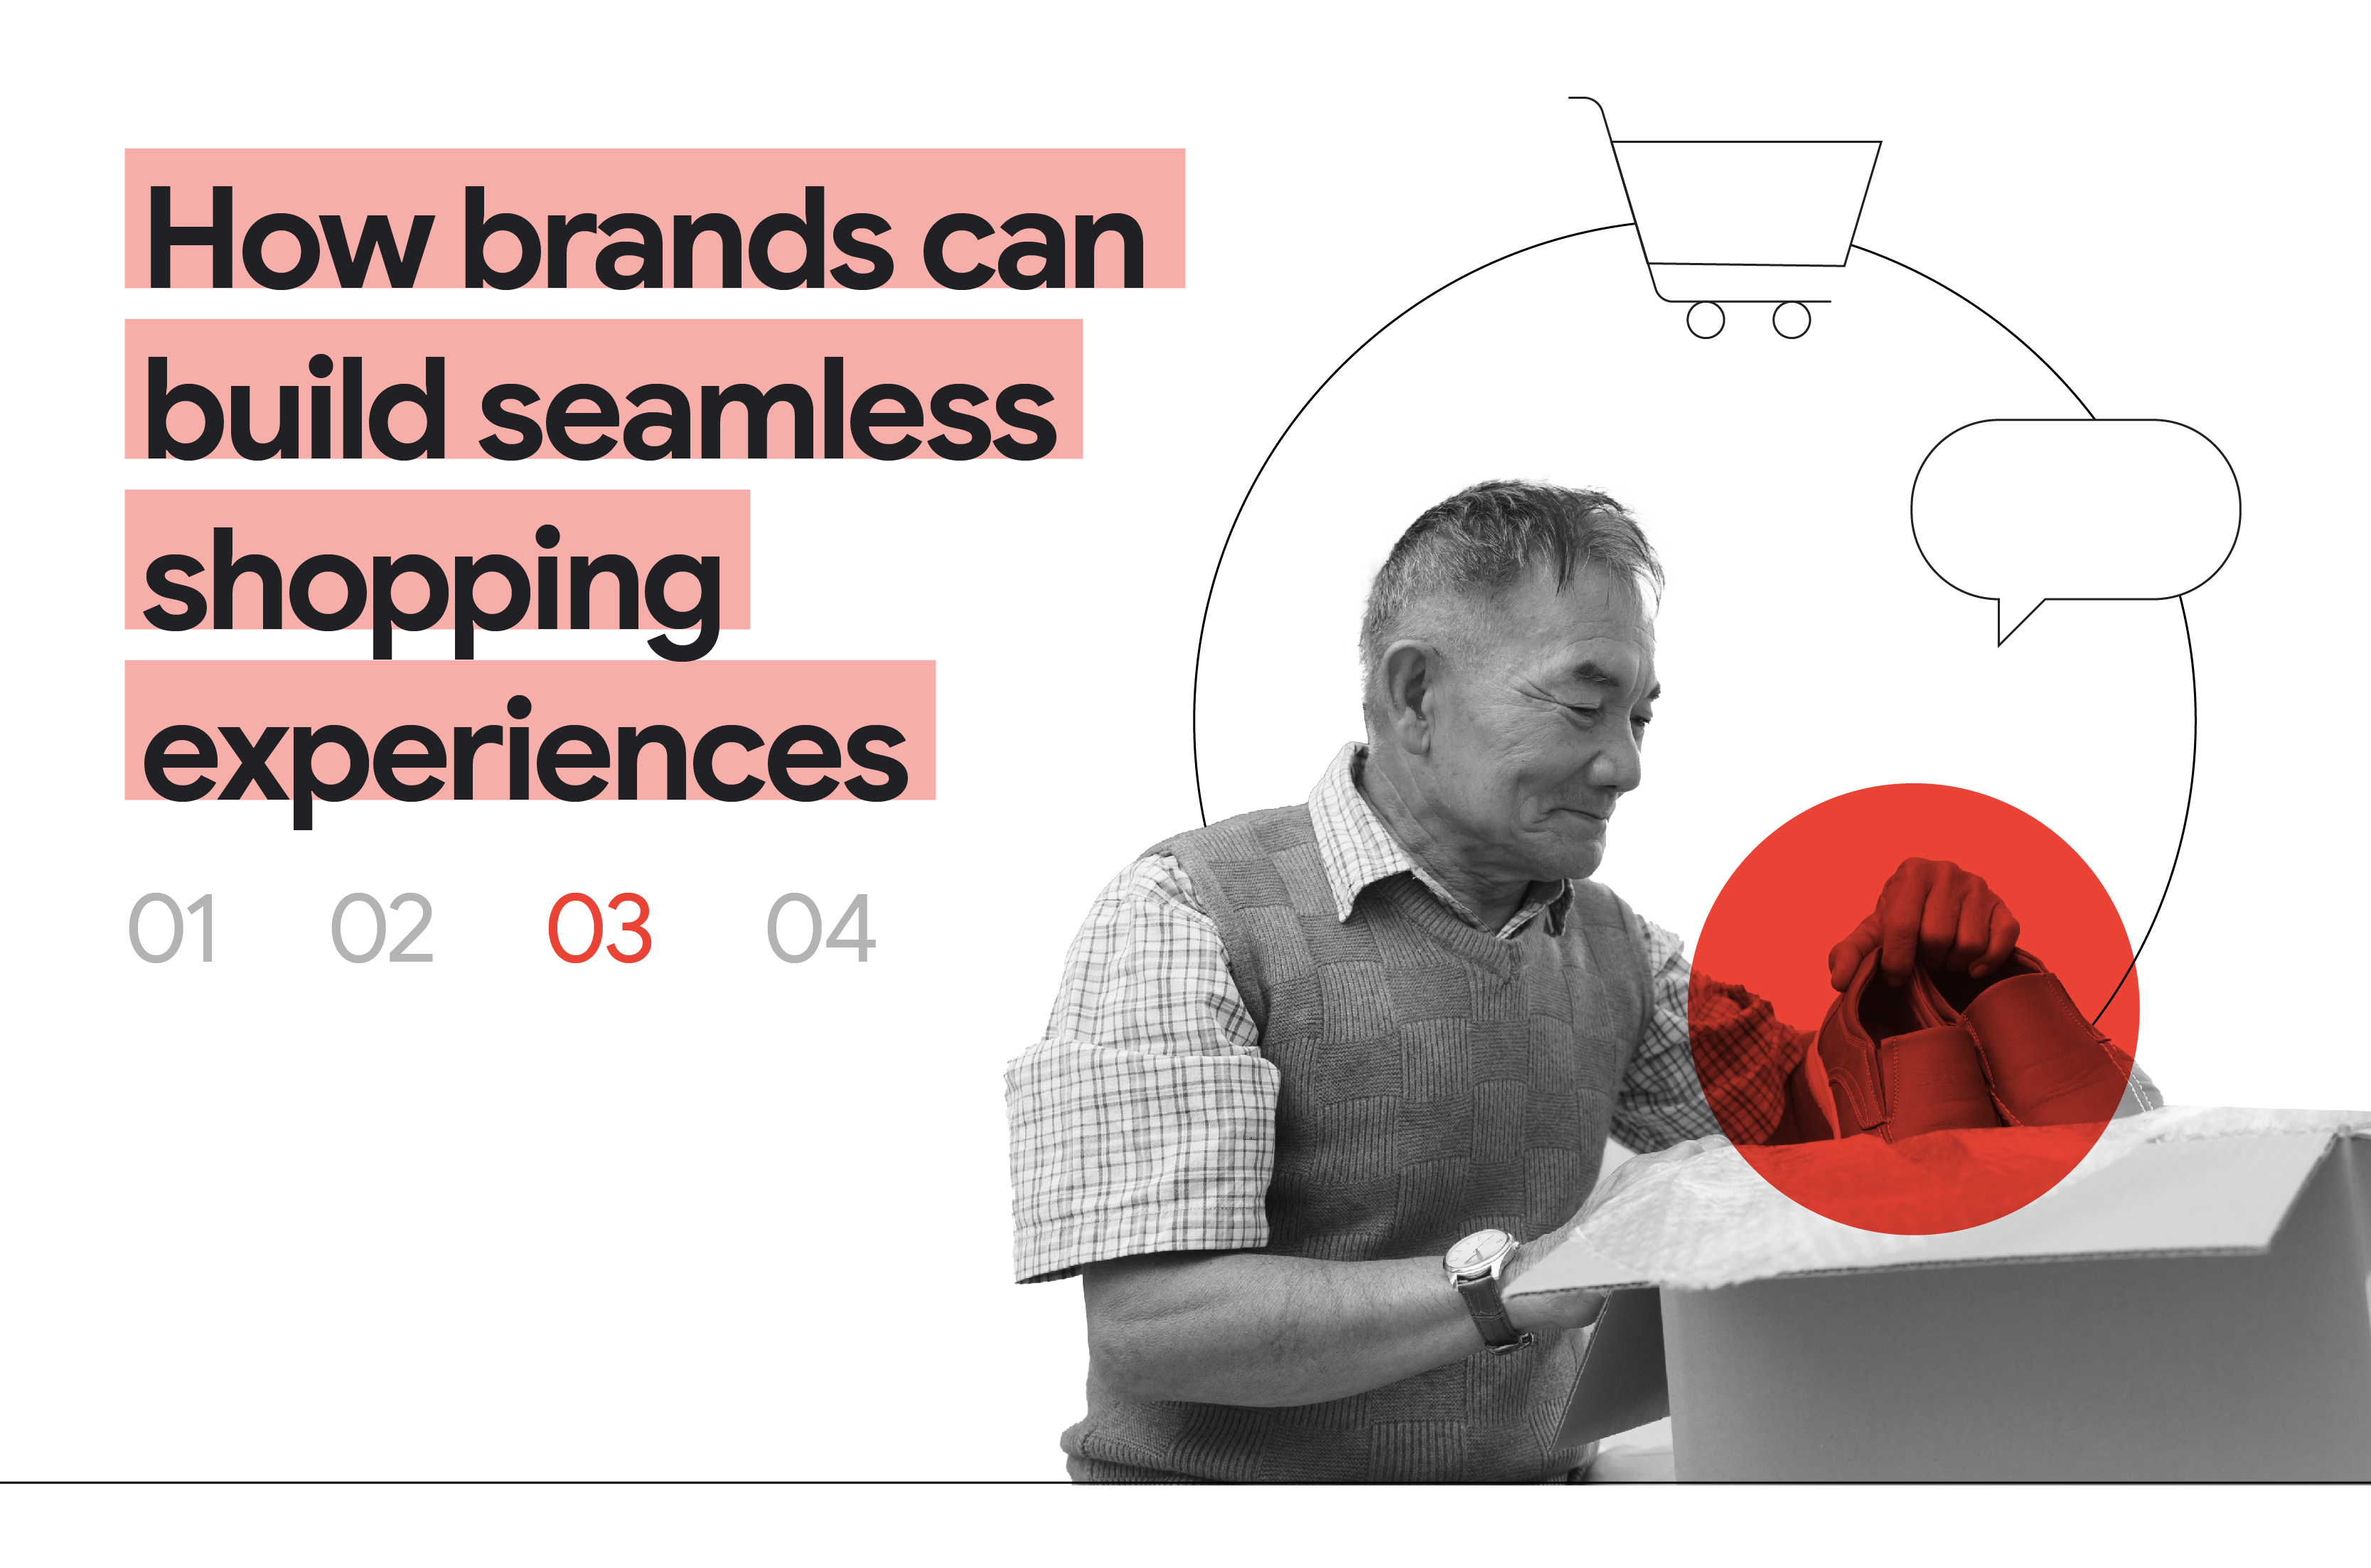 03. How brands can build seamless shopping experiences. An elderly man opens a parcel containing a pair of shoes that he bought online, representing the importance of a strong online brand presence and a seamless e-commerce customer experience.